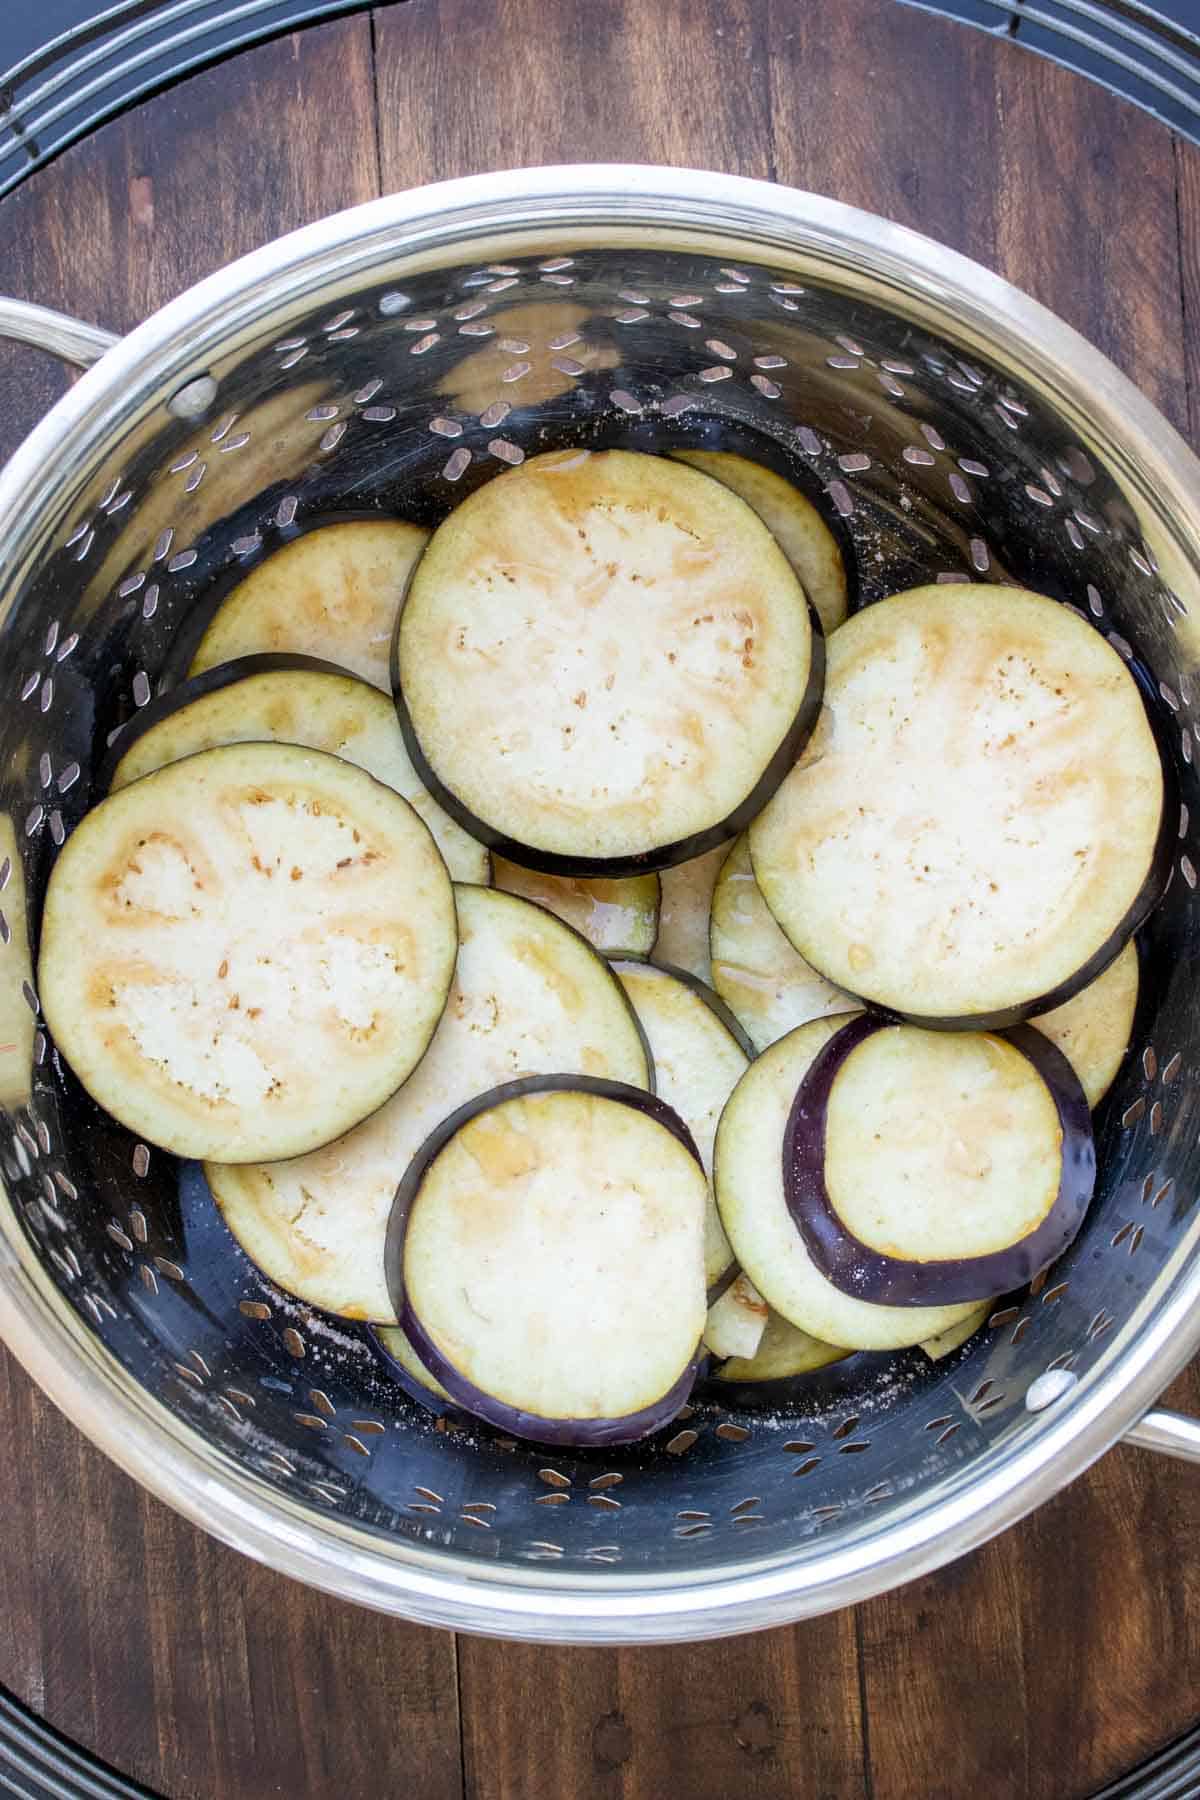 Sliced eggplant in a colander with droplets of water on the surface